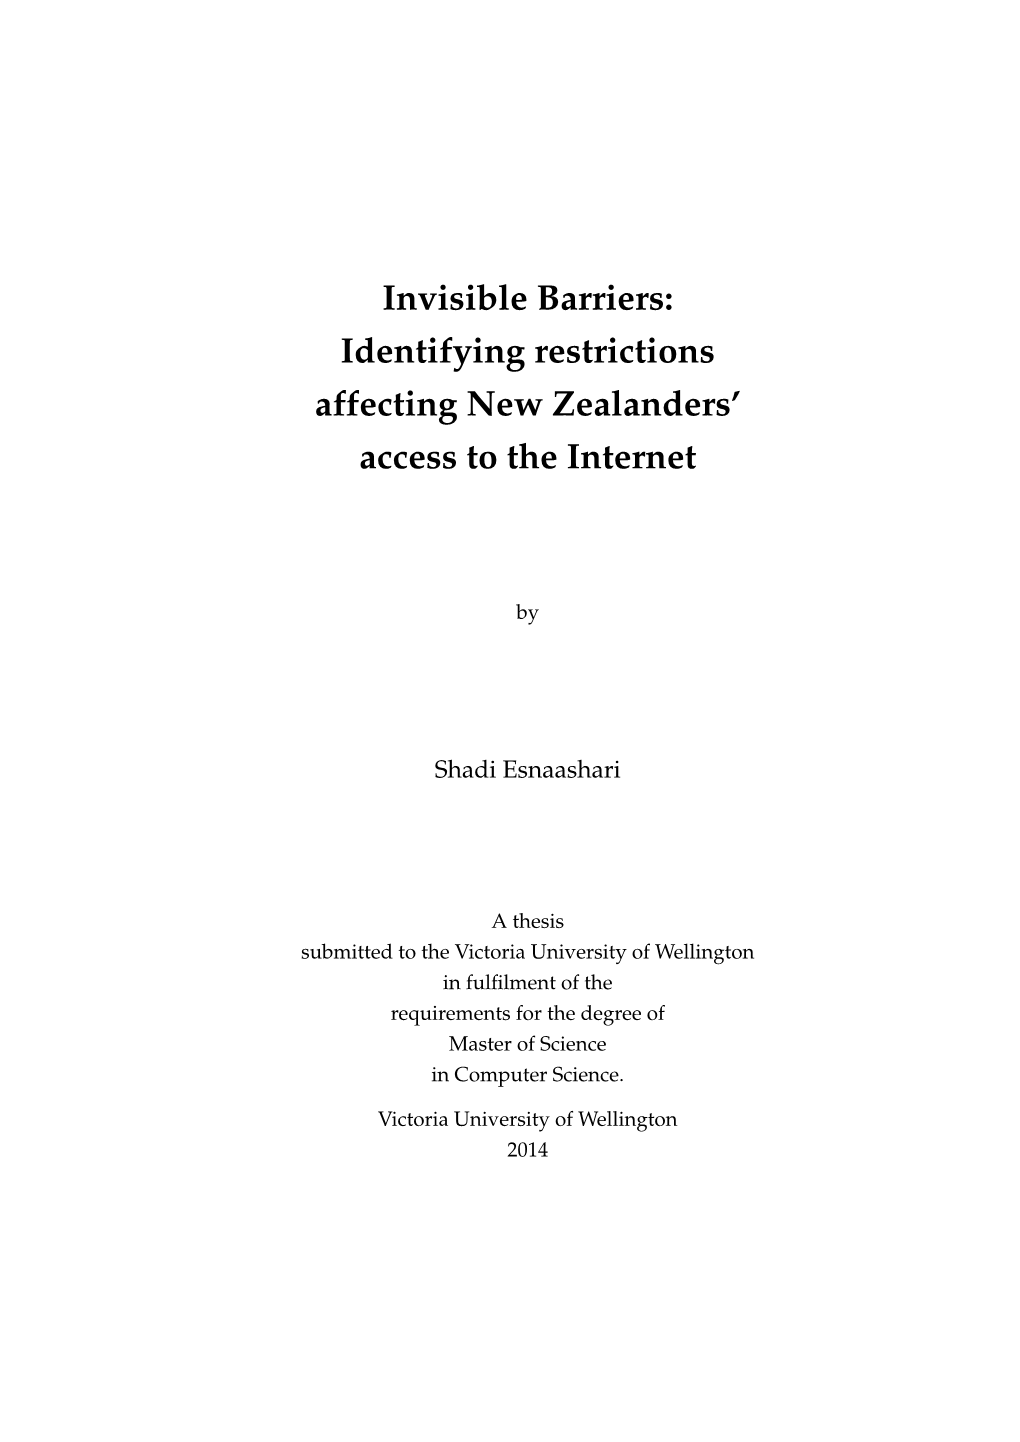 Identifying Restrictions Affecting New Zealanders' Access to the Internet